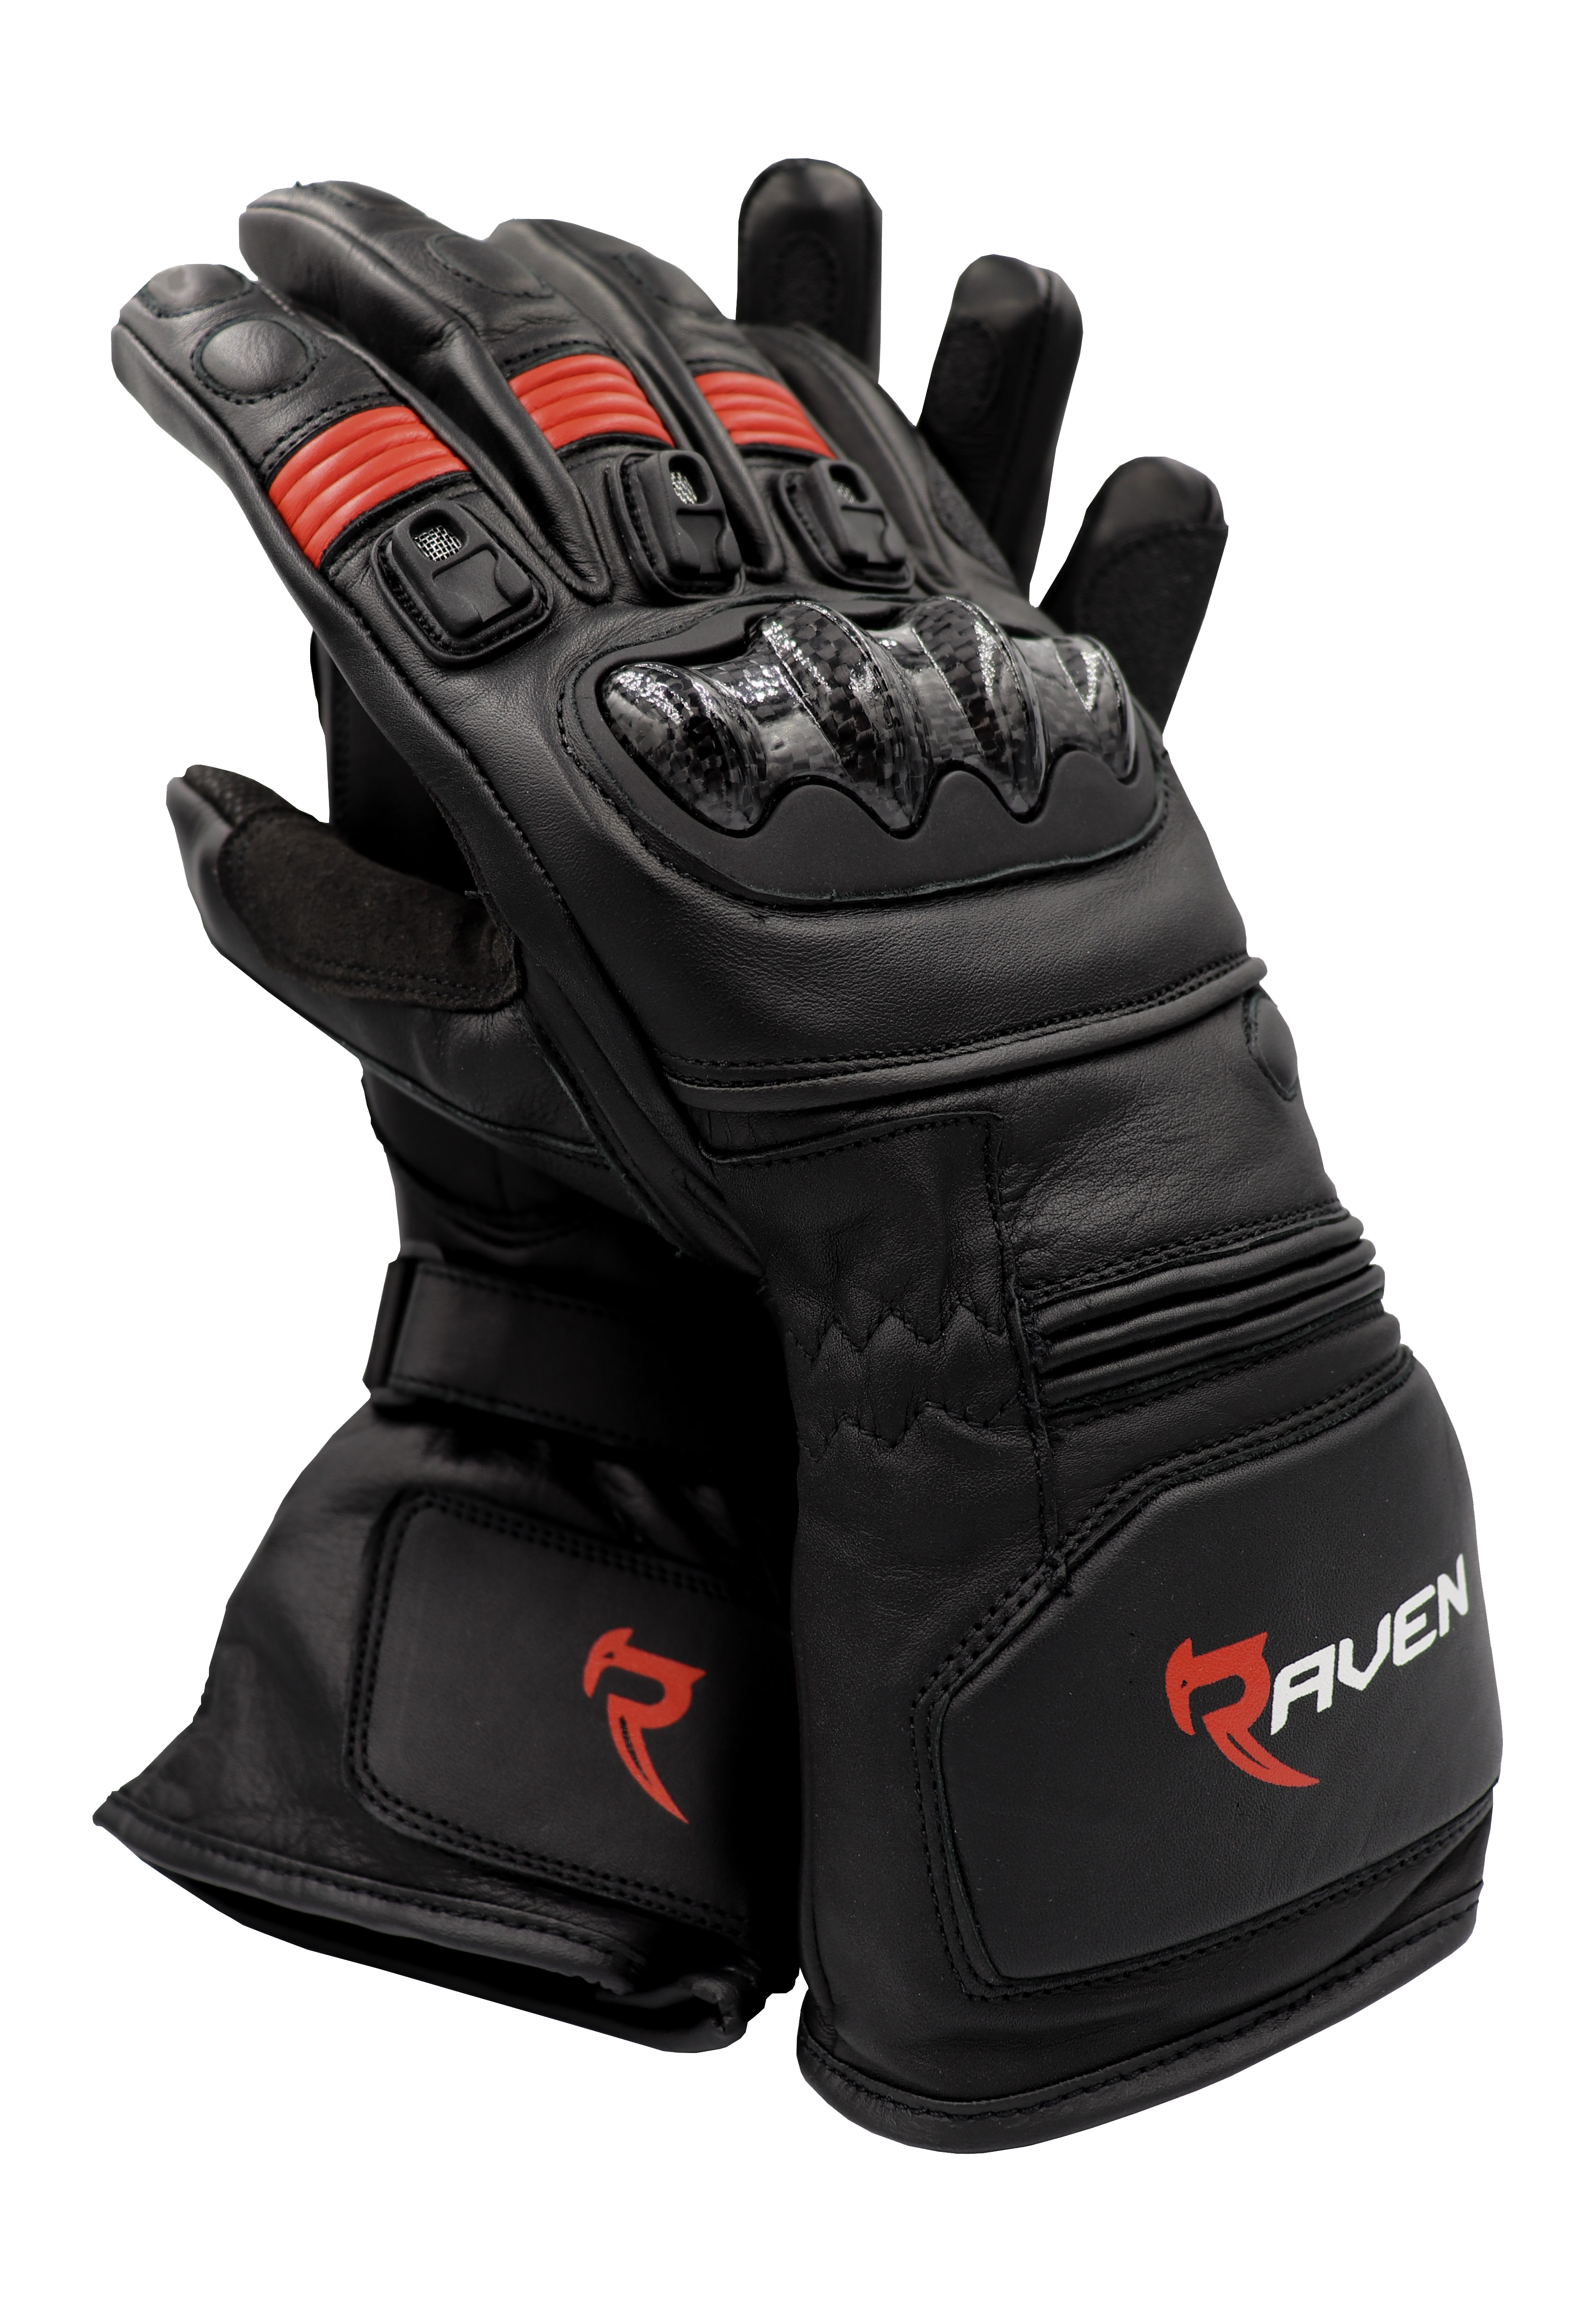 ROGUE - Black and RED Leather Motorcycle Long Cuff Gauntlet Glove by RAVEN Moto 